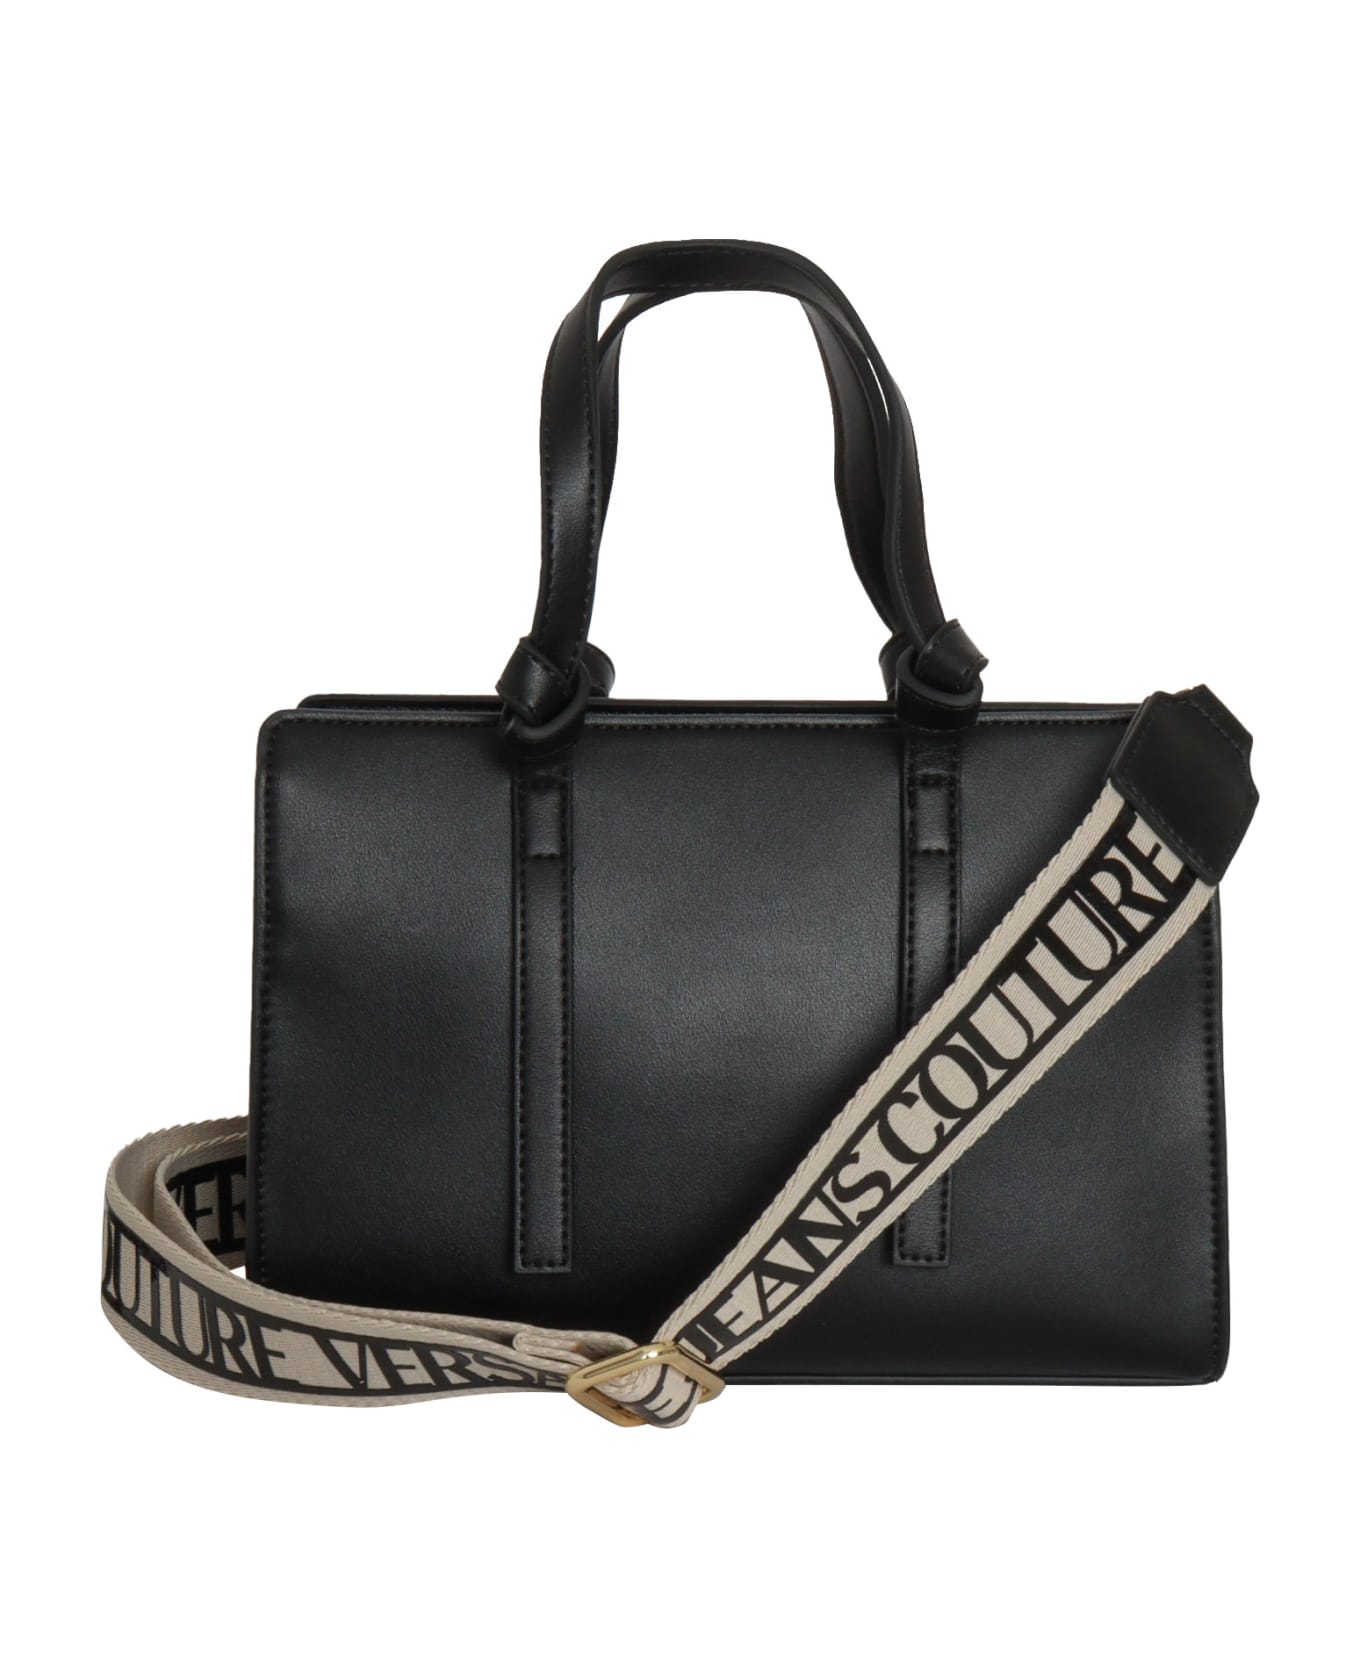 Versace Jeans Couture Tote Bag - Black